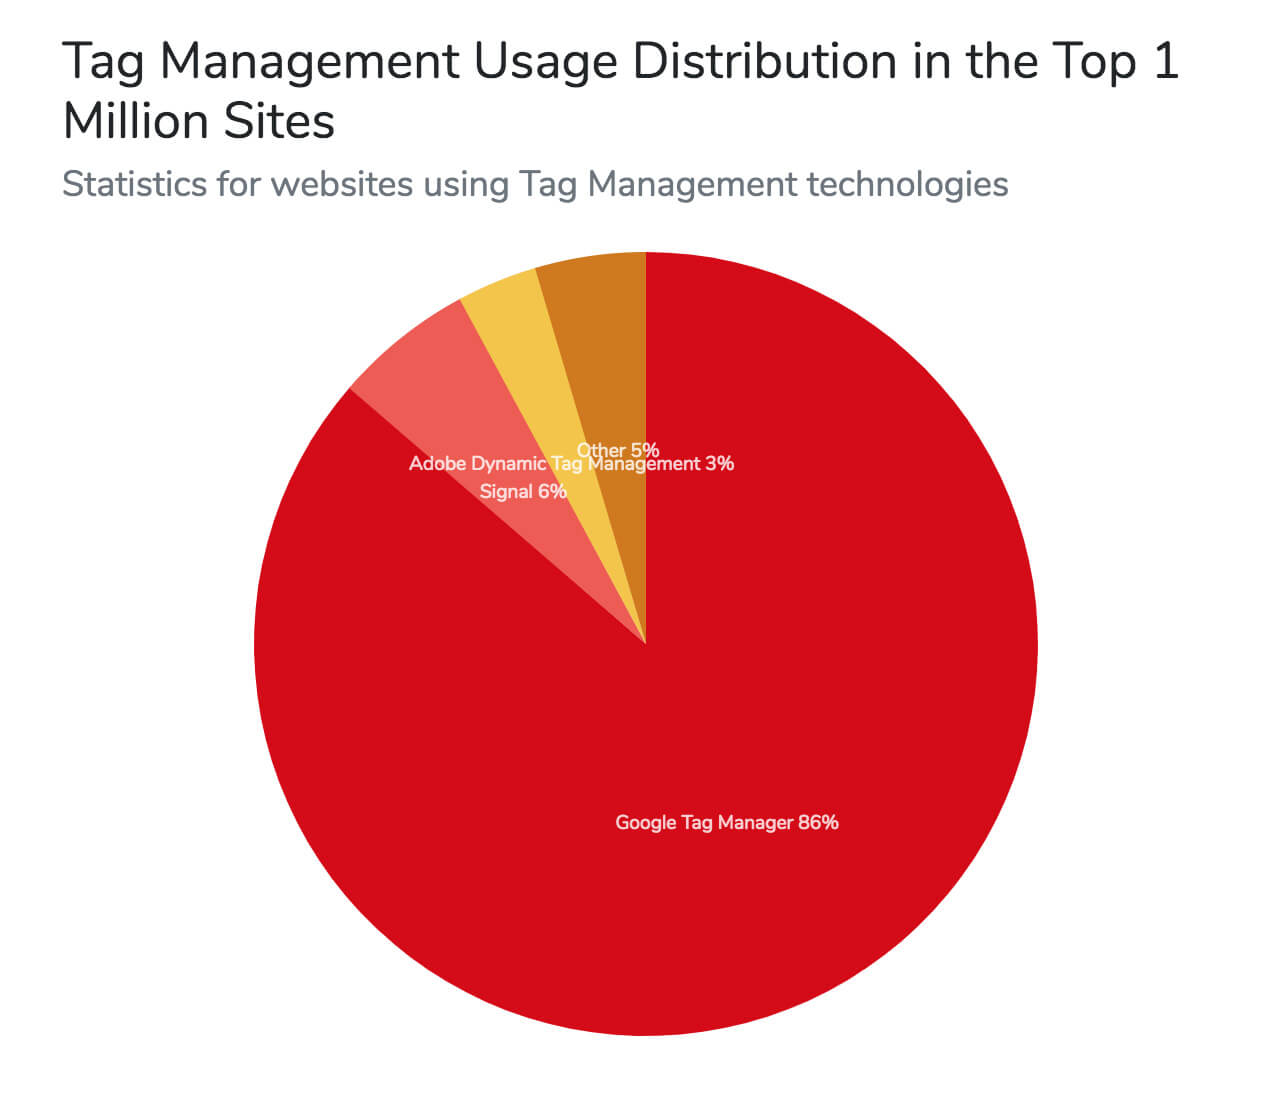 Graphic that shows the Tag Management Usage Distribution in the Top 1 Million Sites